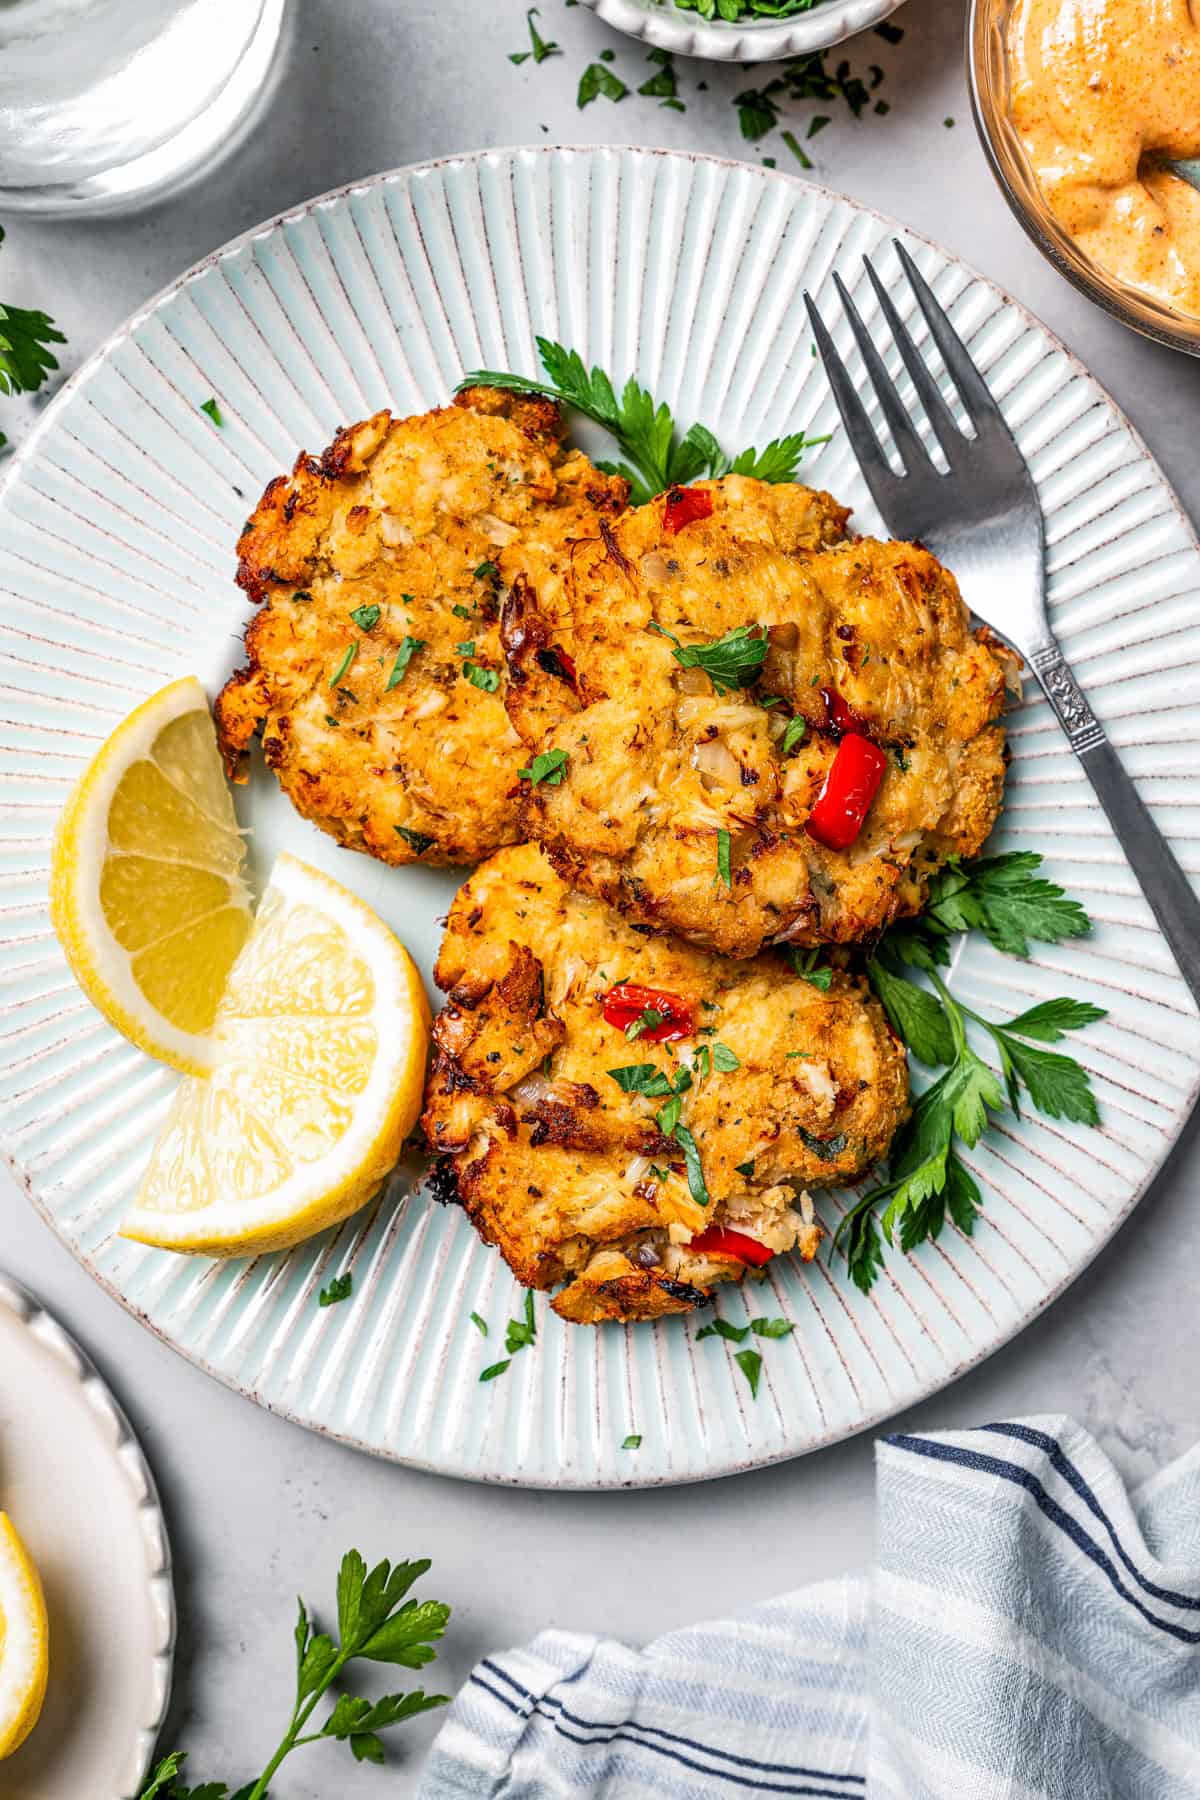 Air fried crab cakes served on a dinner plate and garnished with lemon wedges, next to a fork.